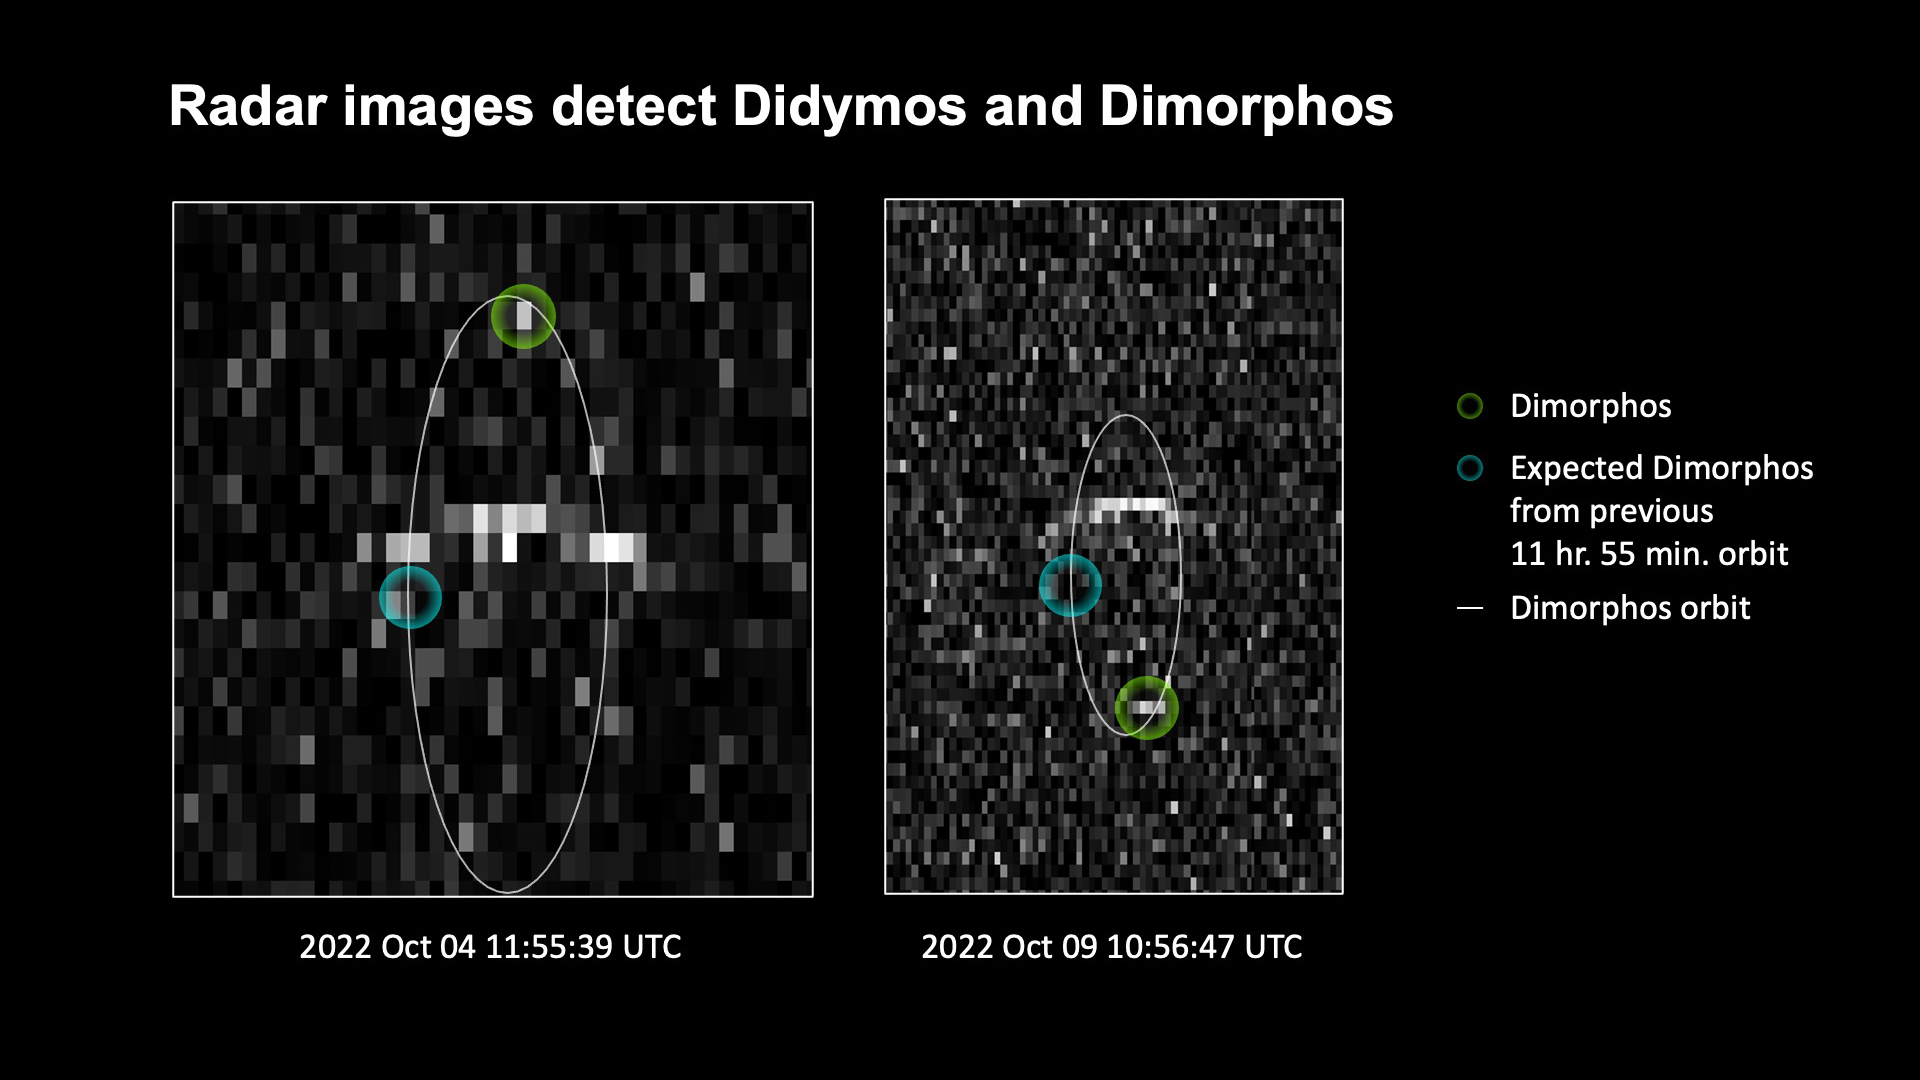 A pixelated black and white image is labeled 2022 Oct 04 11:55:39 UTC and shows a thin circular line representing Dimorphos' orbit. On the line are two semi-transparent circles colored green and blue. The blue circle is at about the 9 o'clock position on the orbit. The green circle is at about the 12 o'clock position. A second similar image to the right has smaller pixels and appears to be a slightly more distant view. The image on the right is labled 2022 Oct 09 10:56:47 UTC. In the image on the right, the blue circle is also at the 9 o'clock position on the orbit, but the green circle is at the 6 o'clock position. A key on the far right of the image identifies the green circle as Dimorphos, the blue circle as Expected Dimorphos from previous 11 hr.55 min. orbit, and the line as Dimorphos orbit.